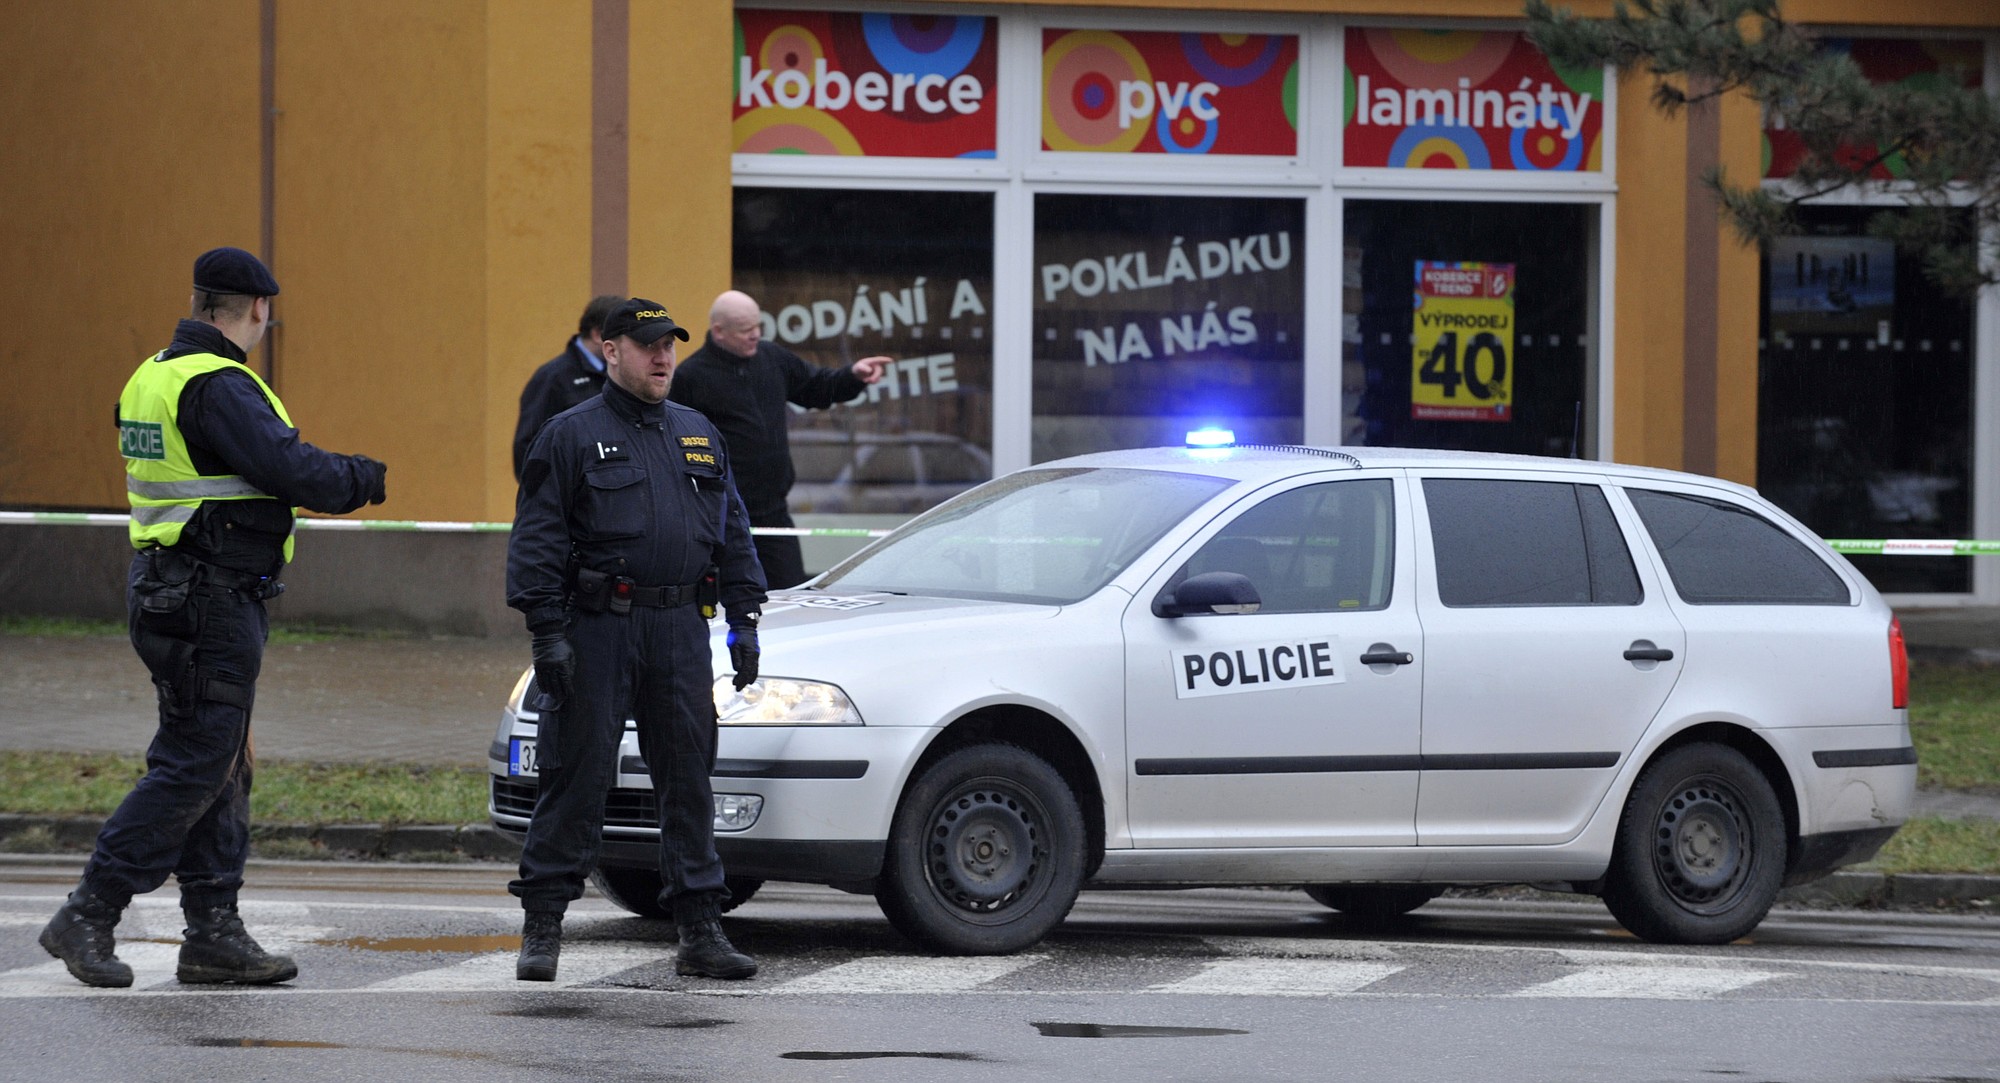 Policemen secure the area near the restaurant where a gunman opened a fatal fire before killing himself in Uhersky Brod, eastern Czech Republic, on Tuesday.